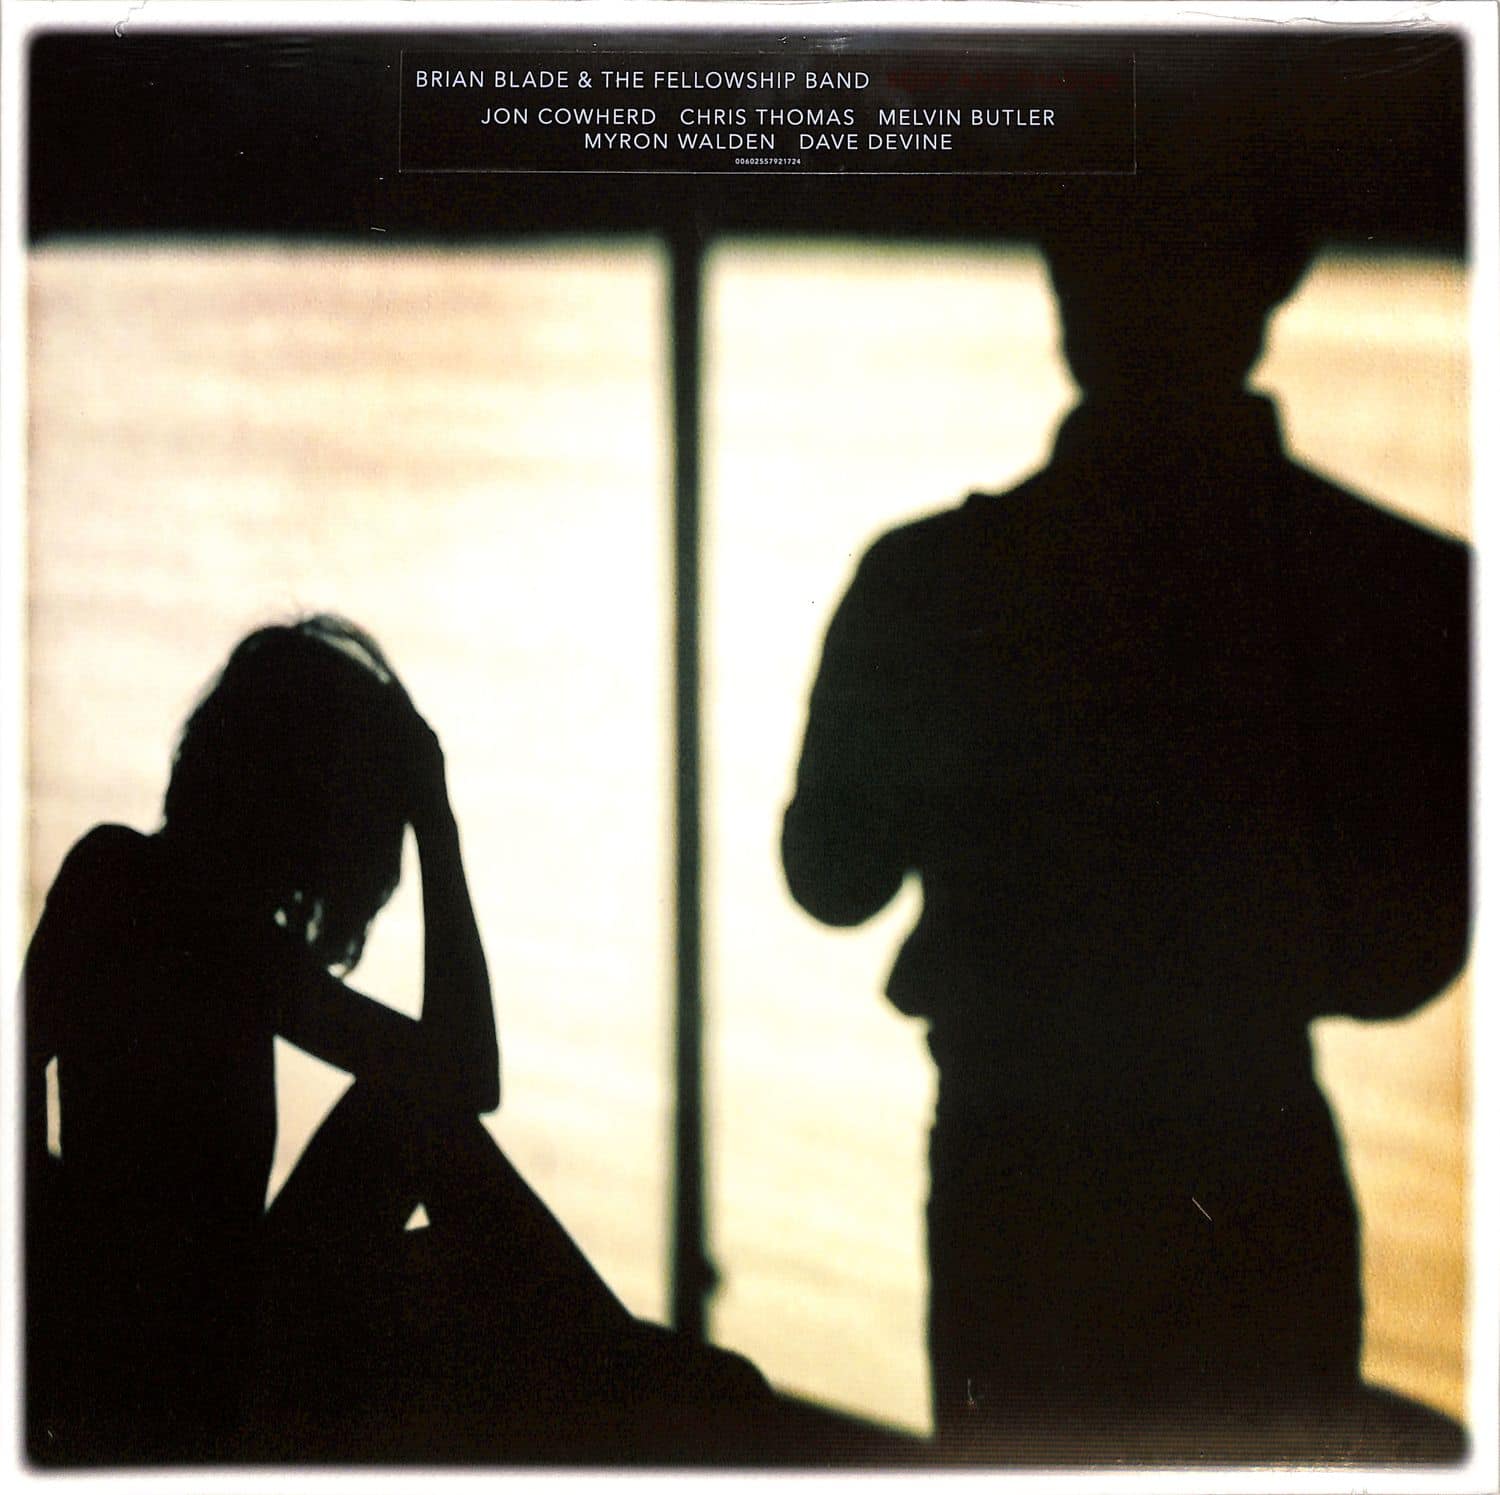 Brian Blade & The Fellowship Band - BODY AND SHADOW 